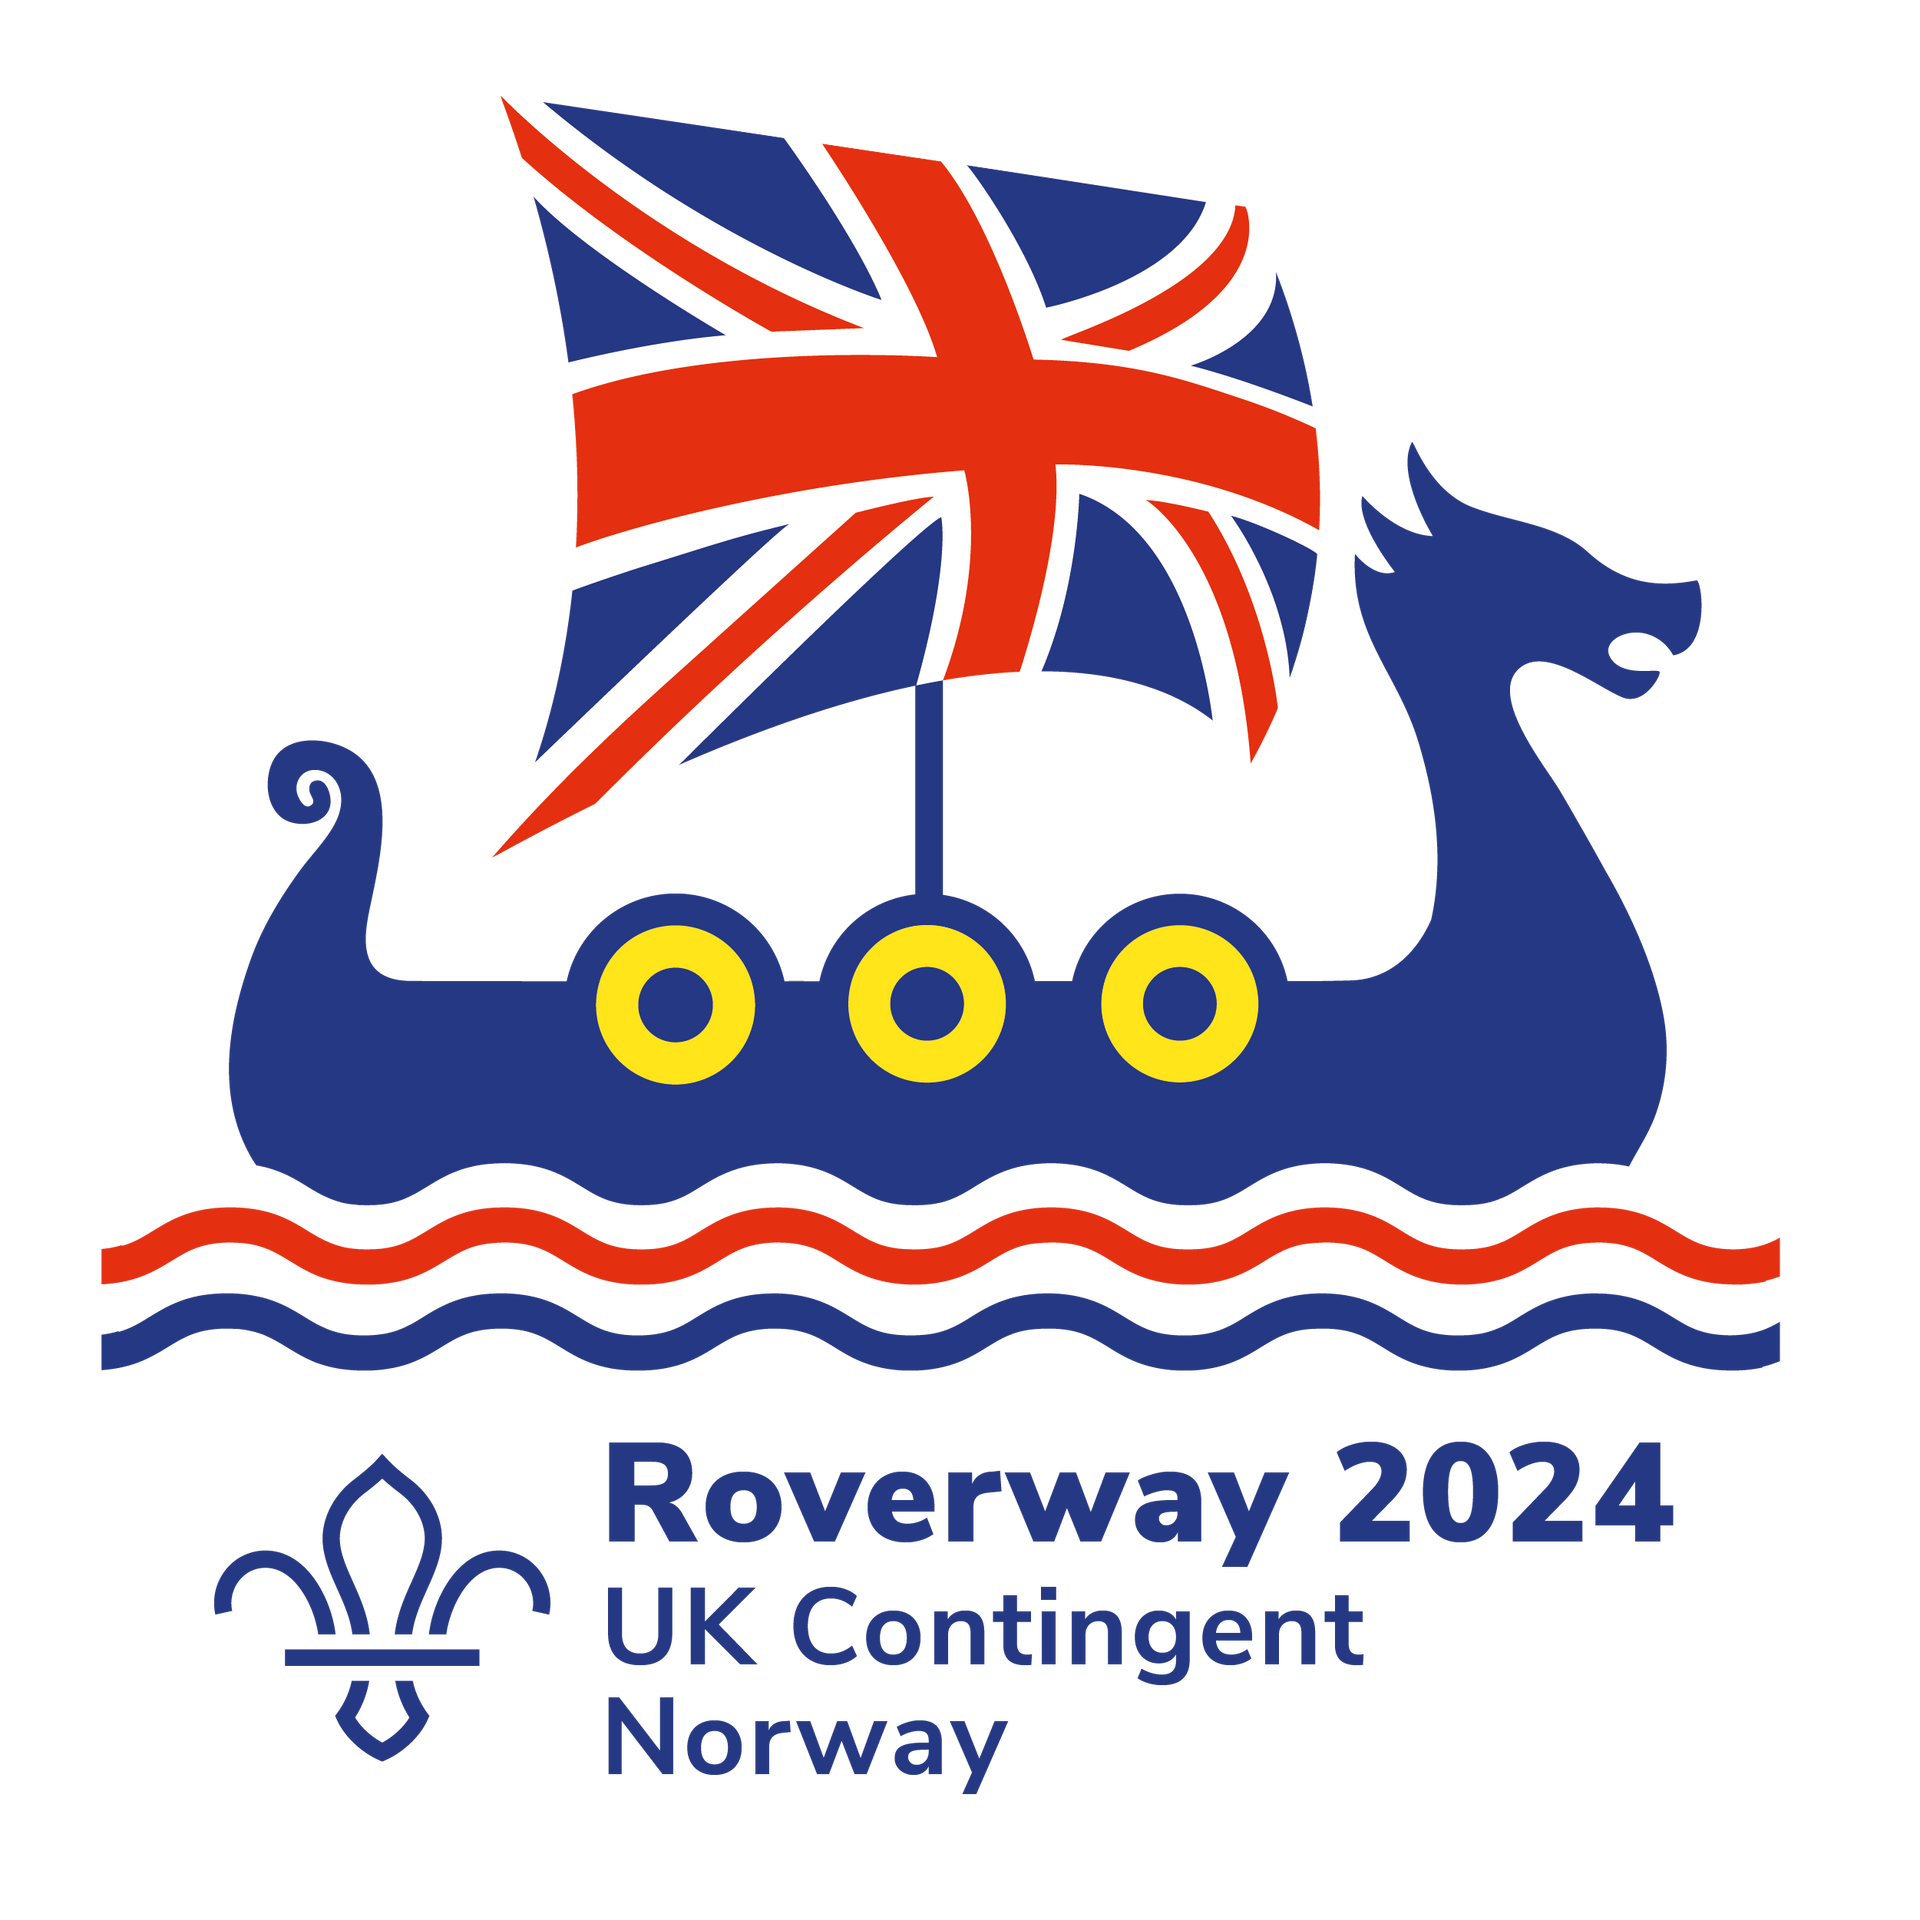 Signup for Roverway 2024